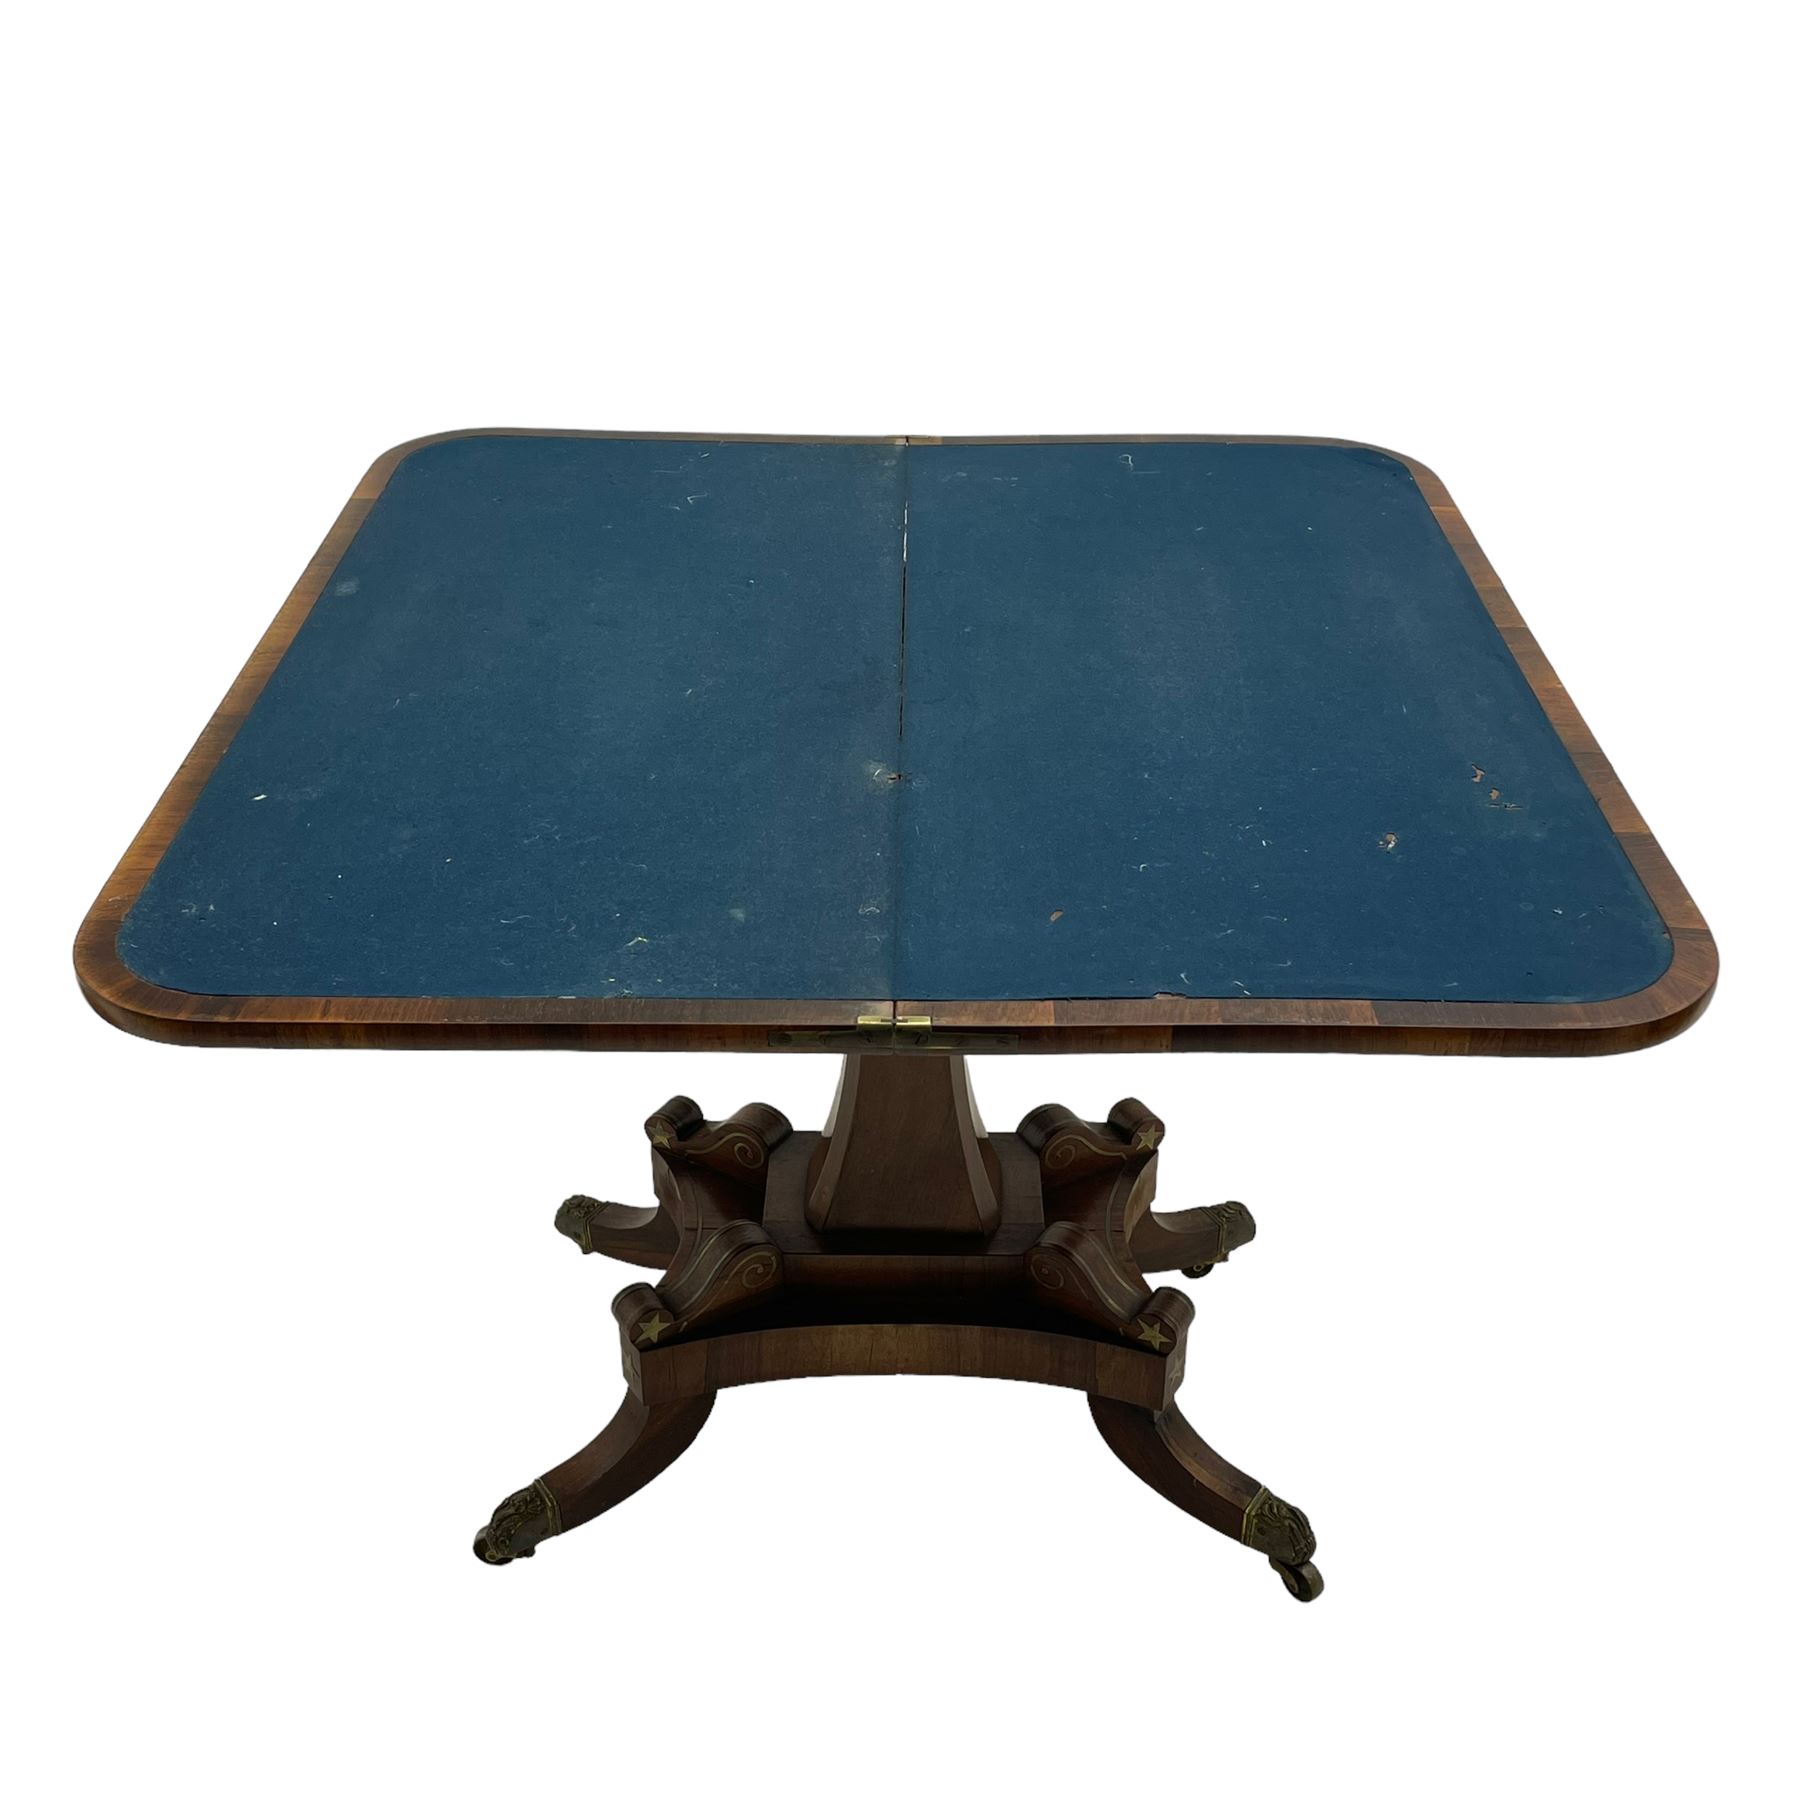 Regency rosewood and brass inlaid card table - Image 13 of 15